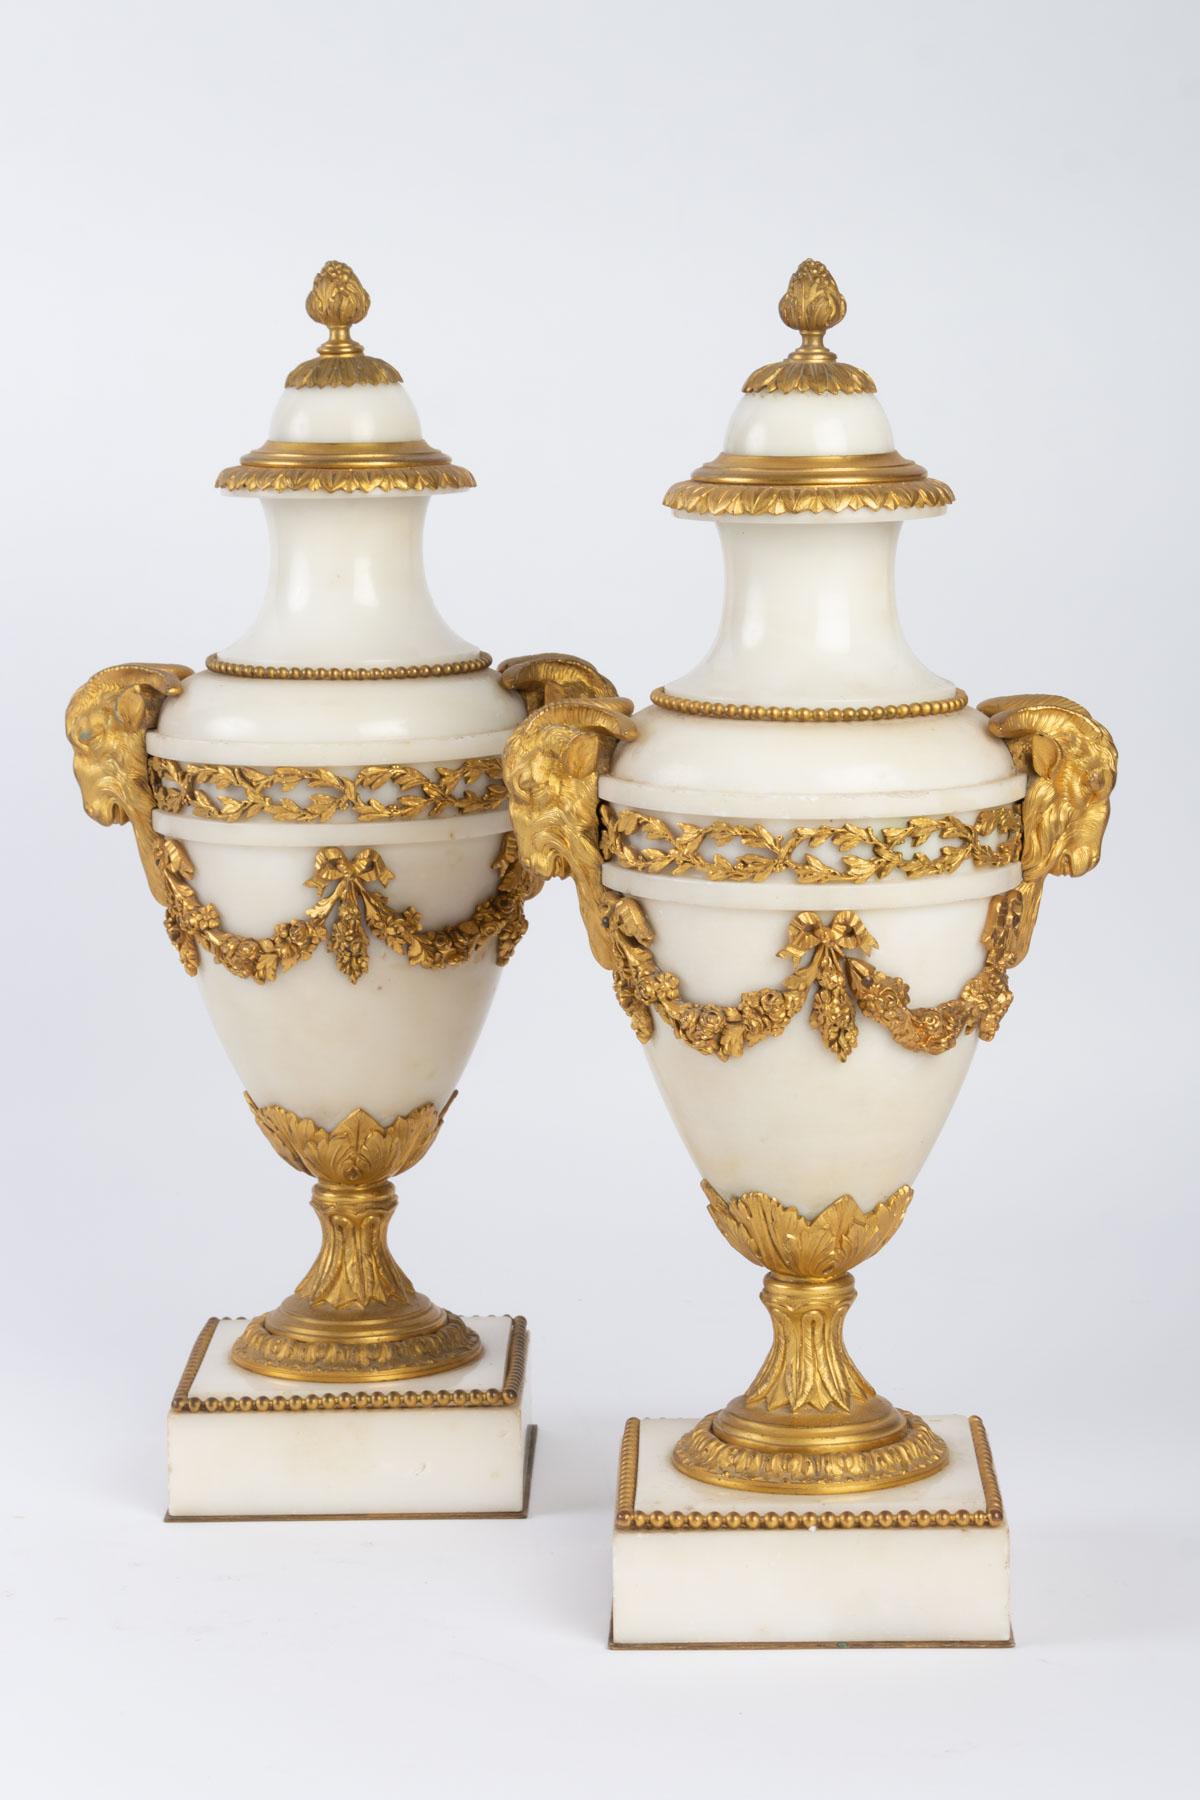 Fireplace trim in the form of cassolettes. Very pure white marble and finely chiseled gilt bronze with garland of flowers and ram's heads Louis XVI style, first half of the 19th century.

Measures: H 38 cm, W 17 cm, D 10.5 cm.